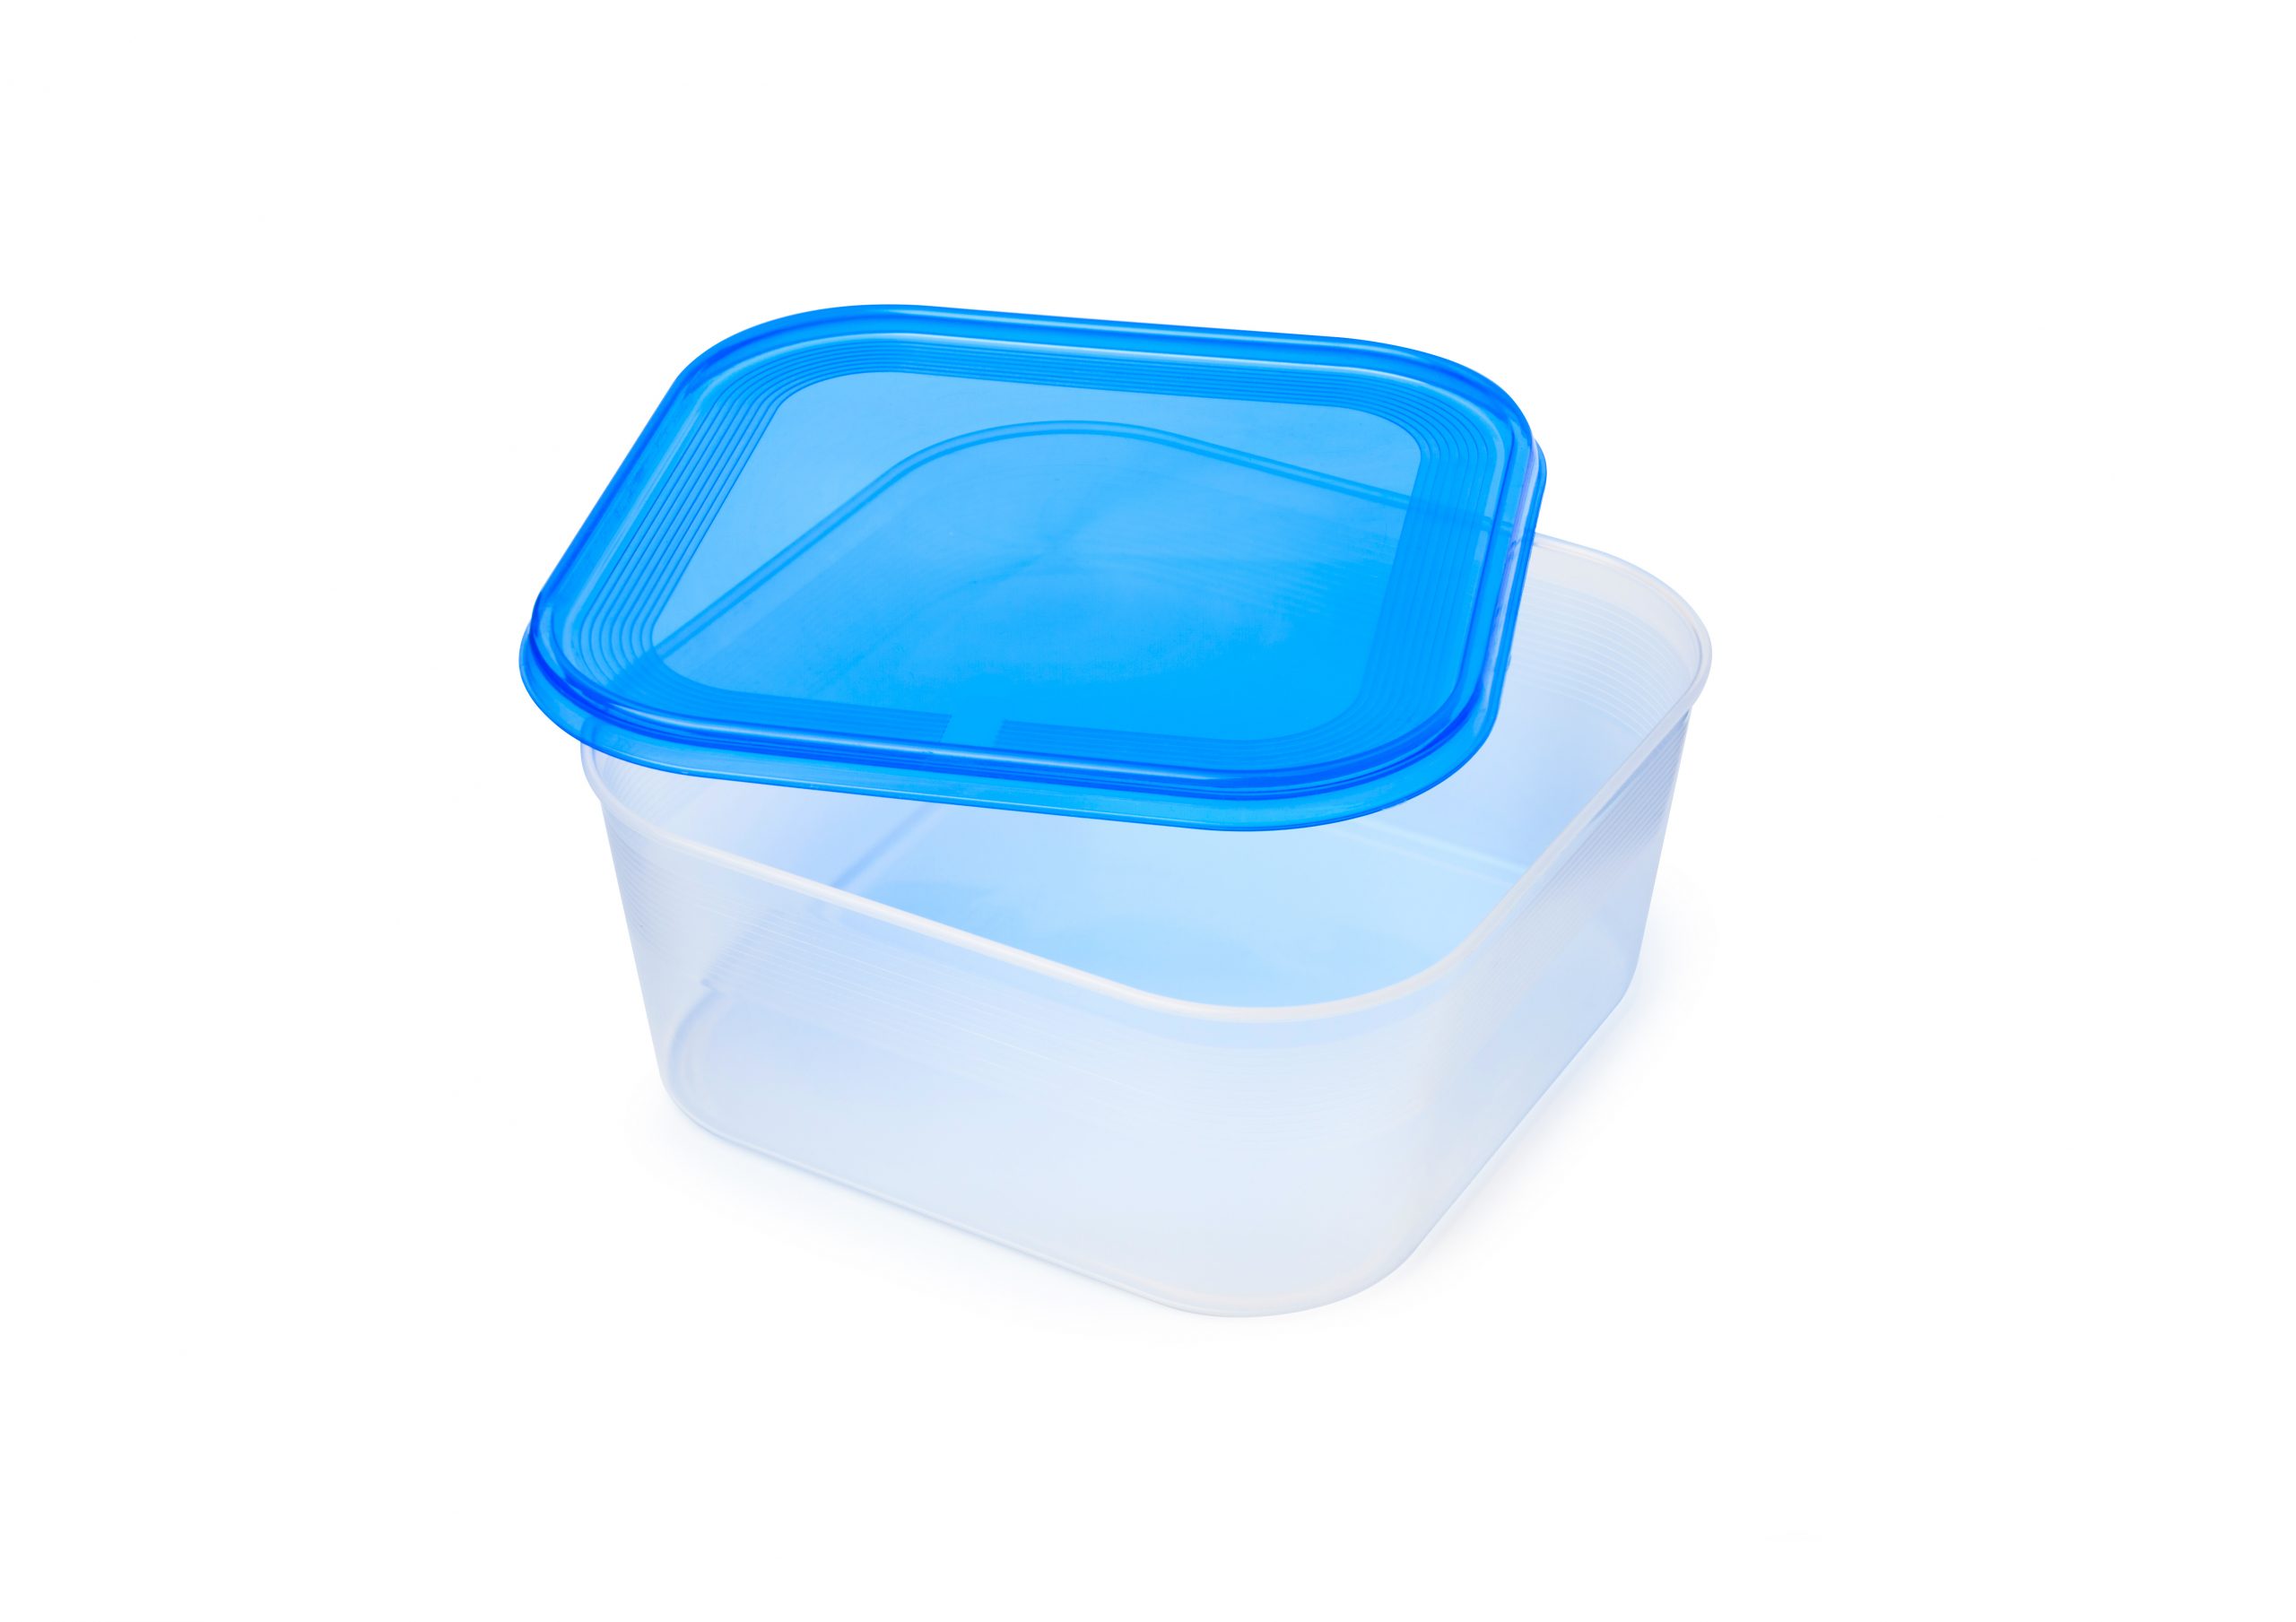 Reusable containers aren't always better for the environment than